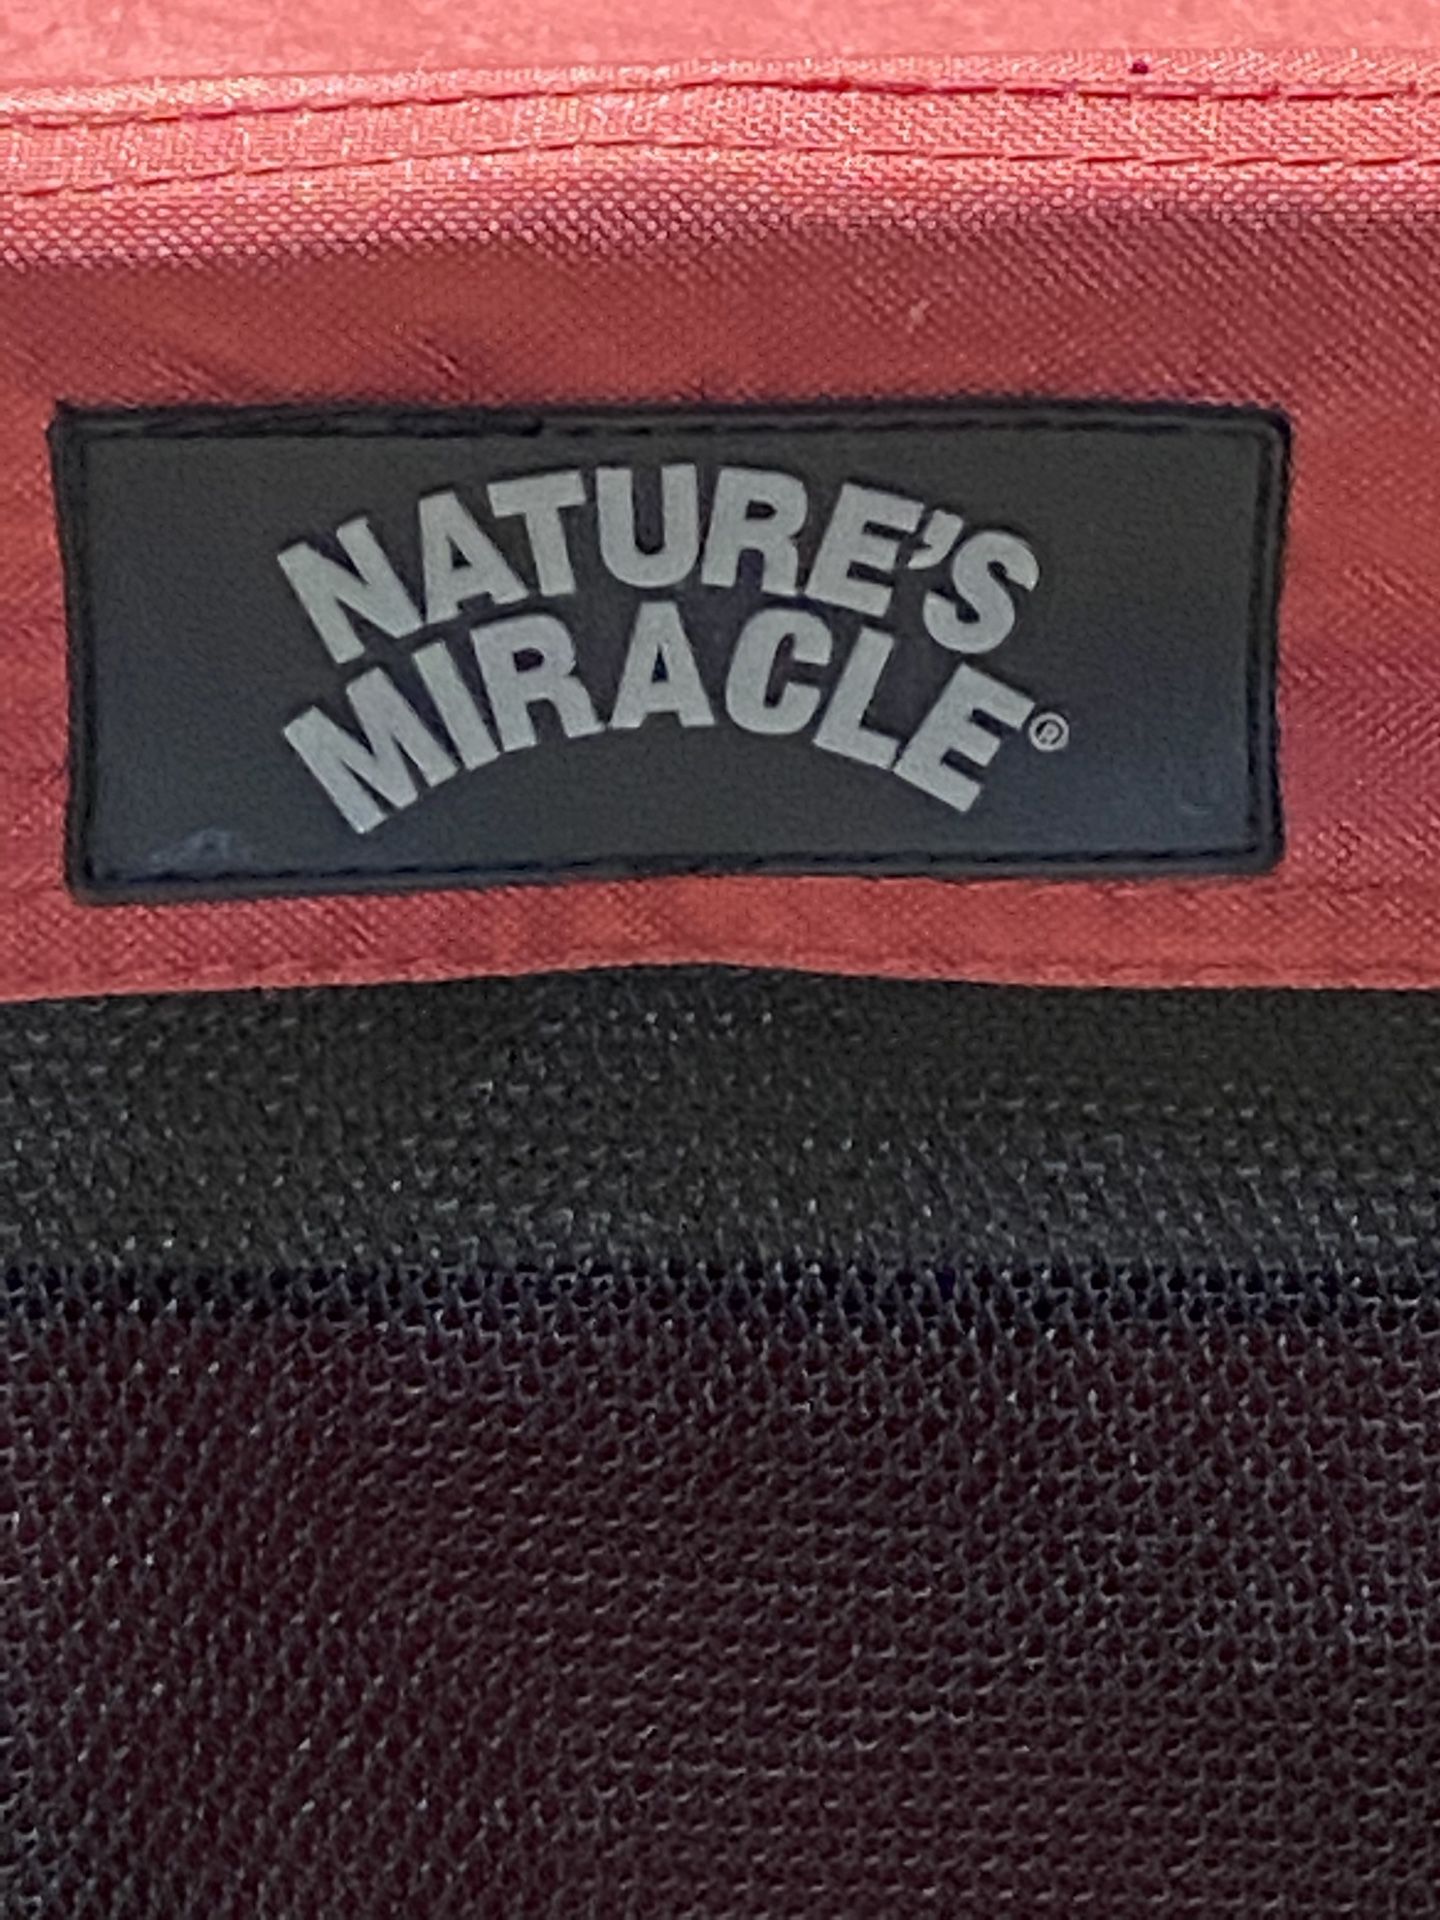 Natures miracle portable dog crate.